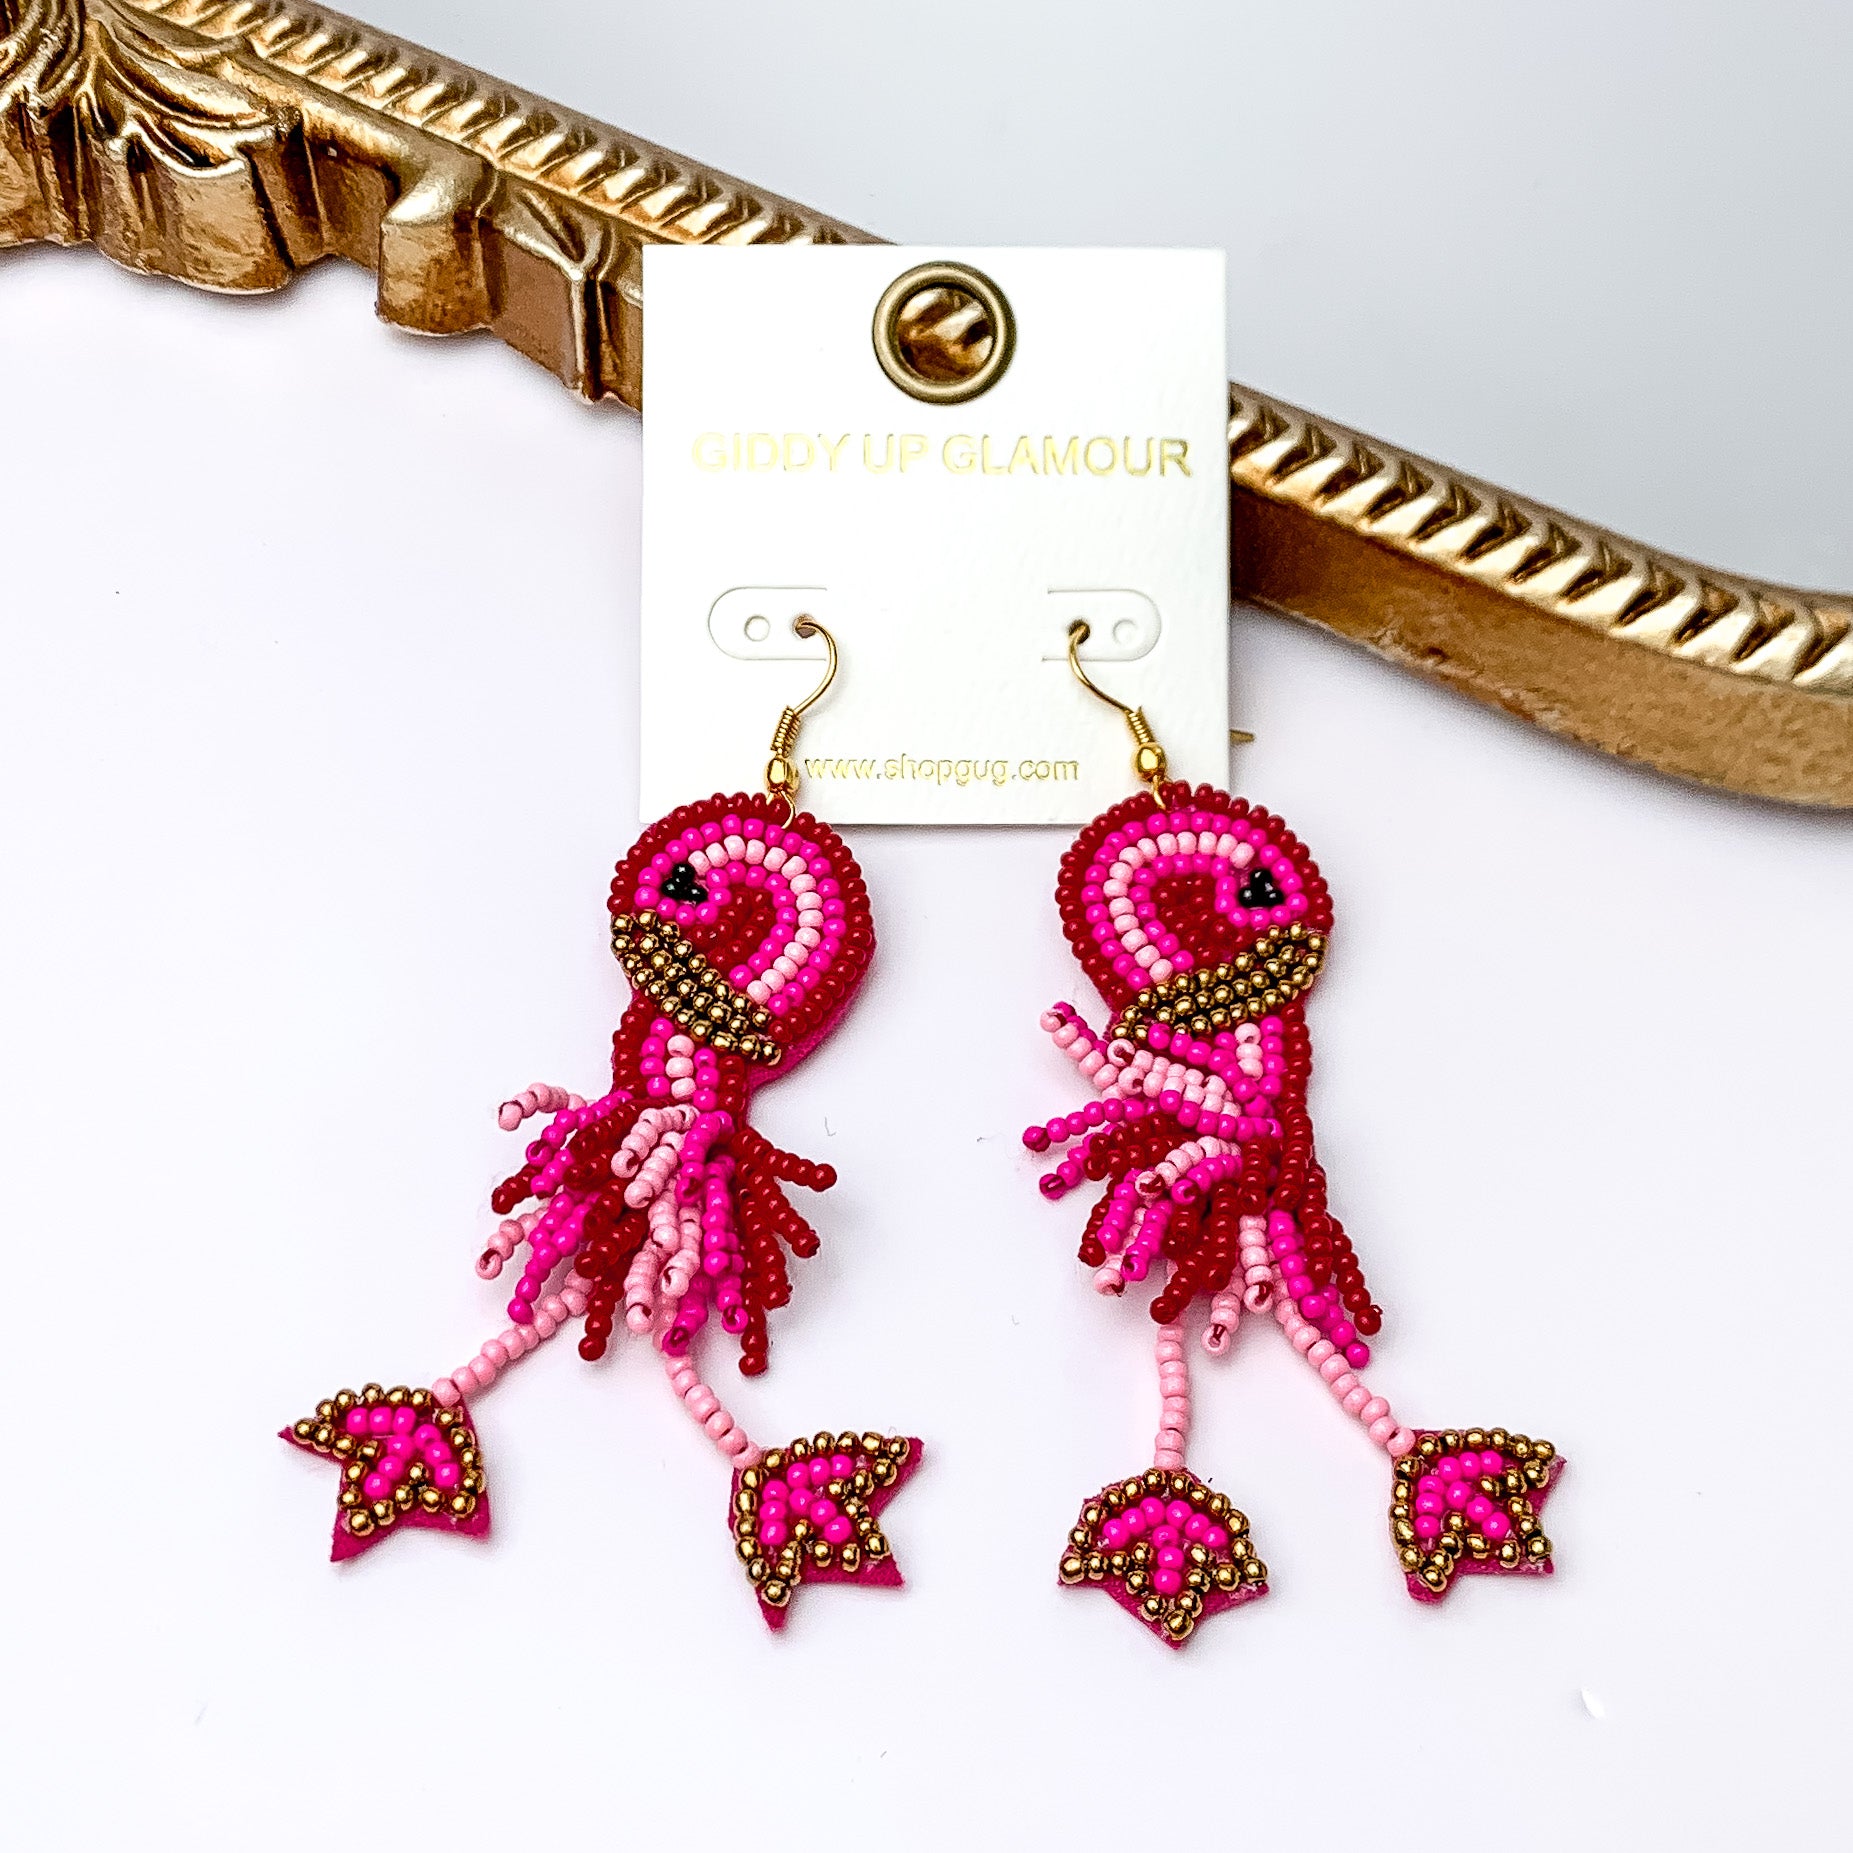 These earrings include multiple color pink beads and a gold detailing. Hanging from the bottom of the flamingo shaped beaded pendant has dangling legs. These earrings are pictured leaning agasint a gold mirror on a white background.